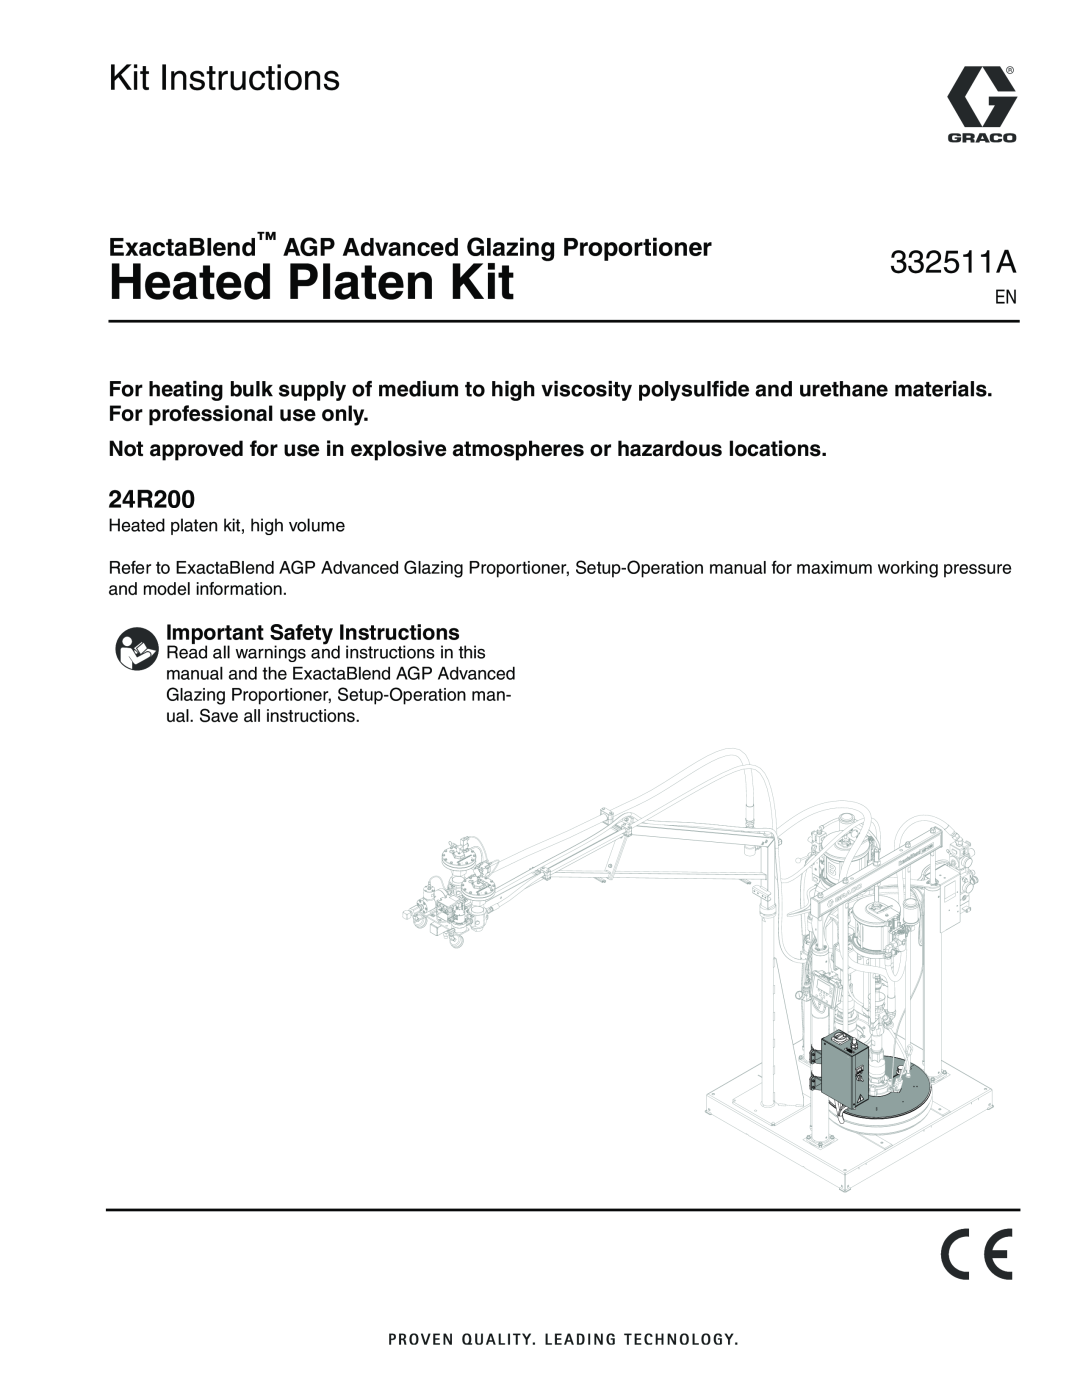 Graco 24R200 operation manual Heated Platen Kit, Kit Instructions, 332511A, ExactaBlend AGP Advanced Glazing Proportioner 